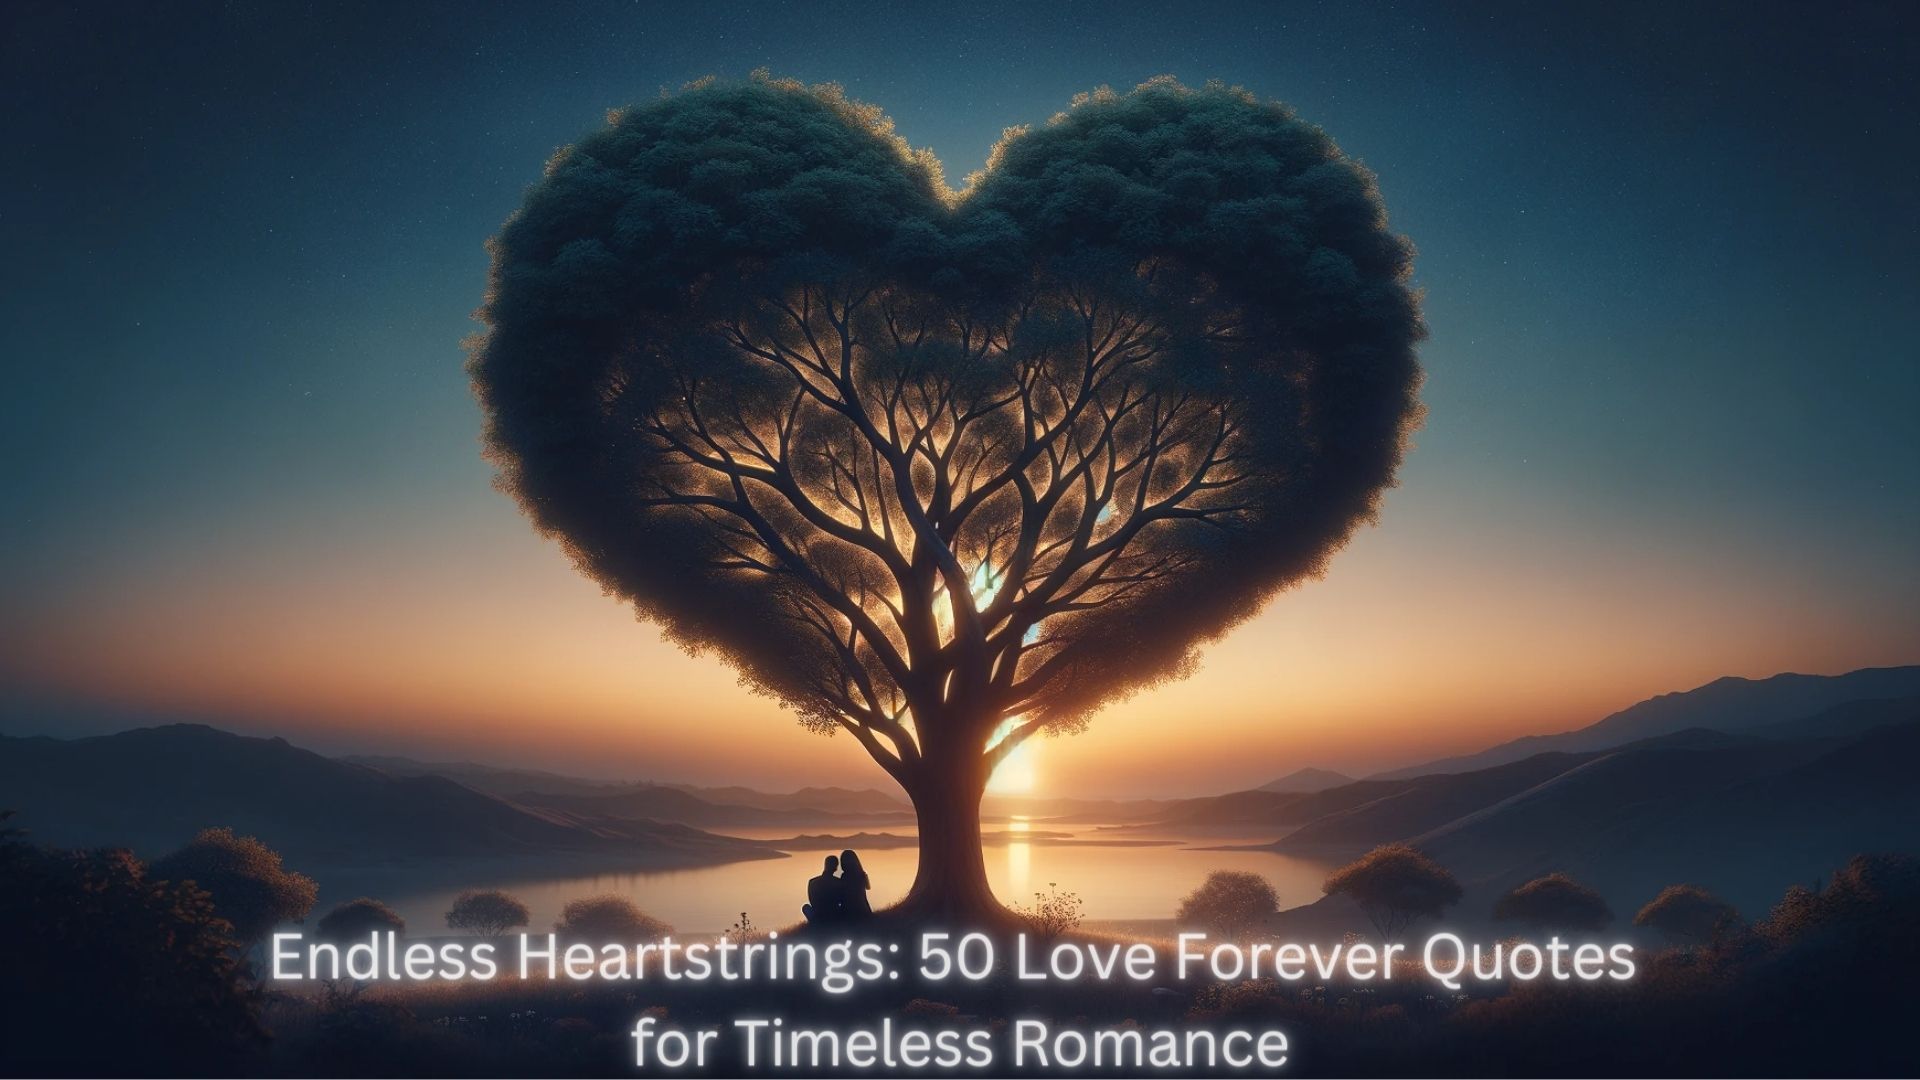 You are currently viewing Endless Heartstrings: 50 Love Forever Quotes for Timeless Romance